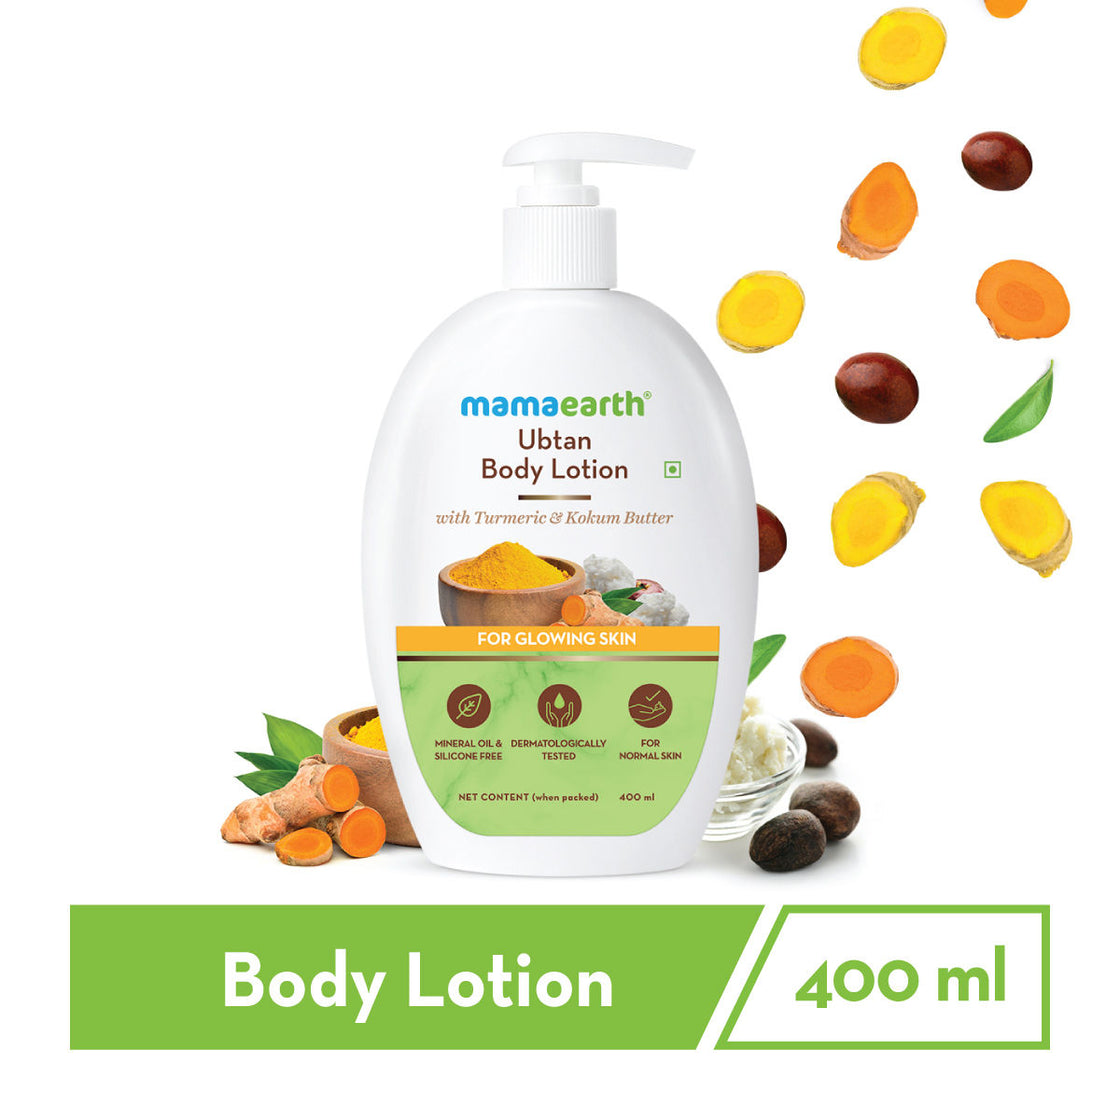 Mamaearth Ubtan Body Lotion With Turmeric & Kokum Butter For Glowing Skin